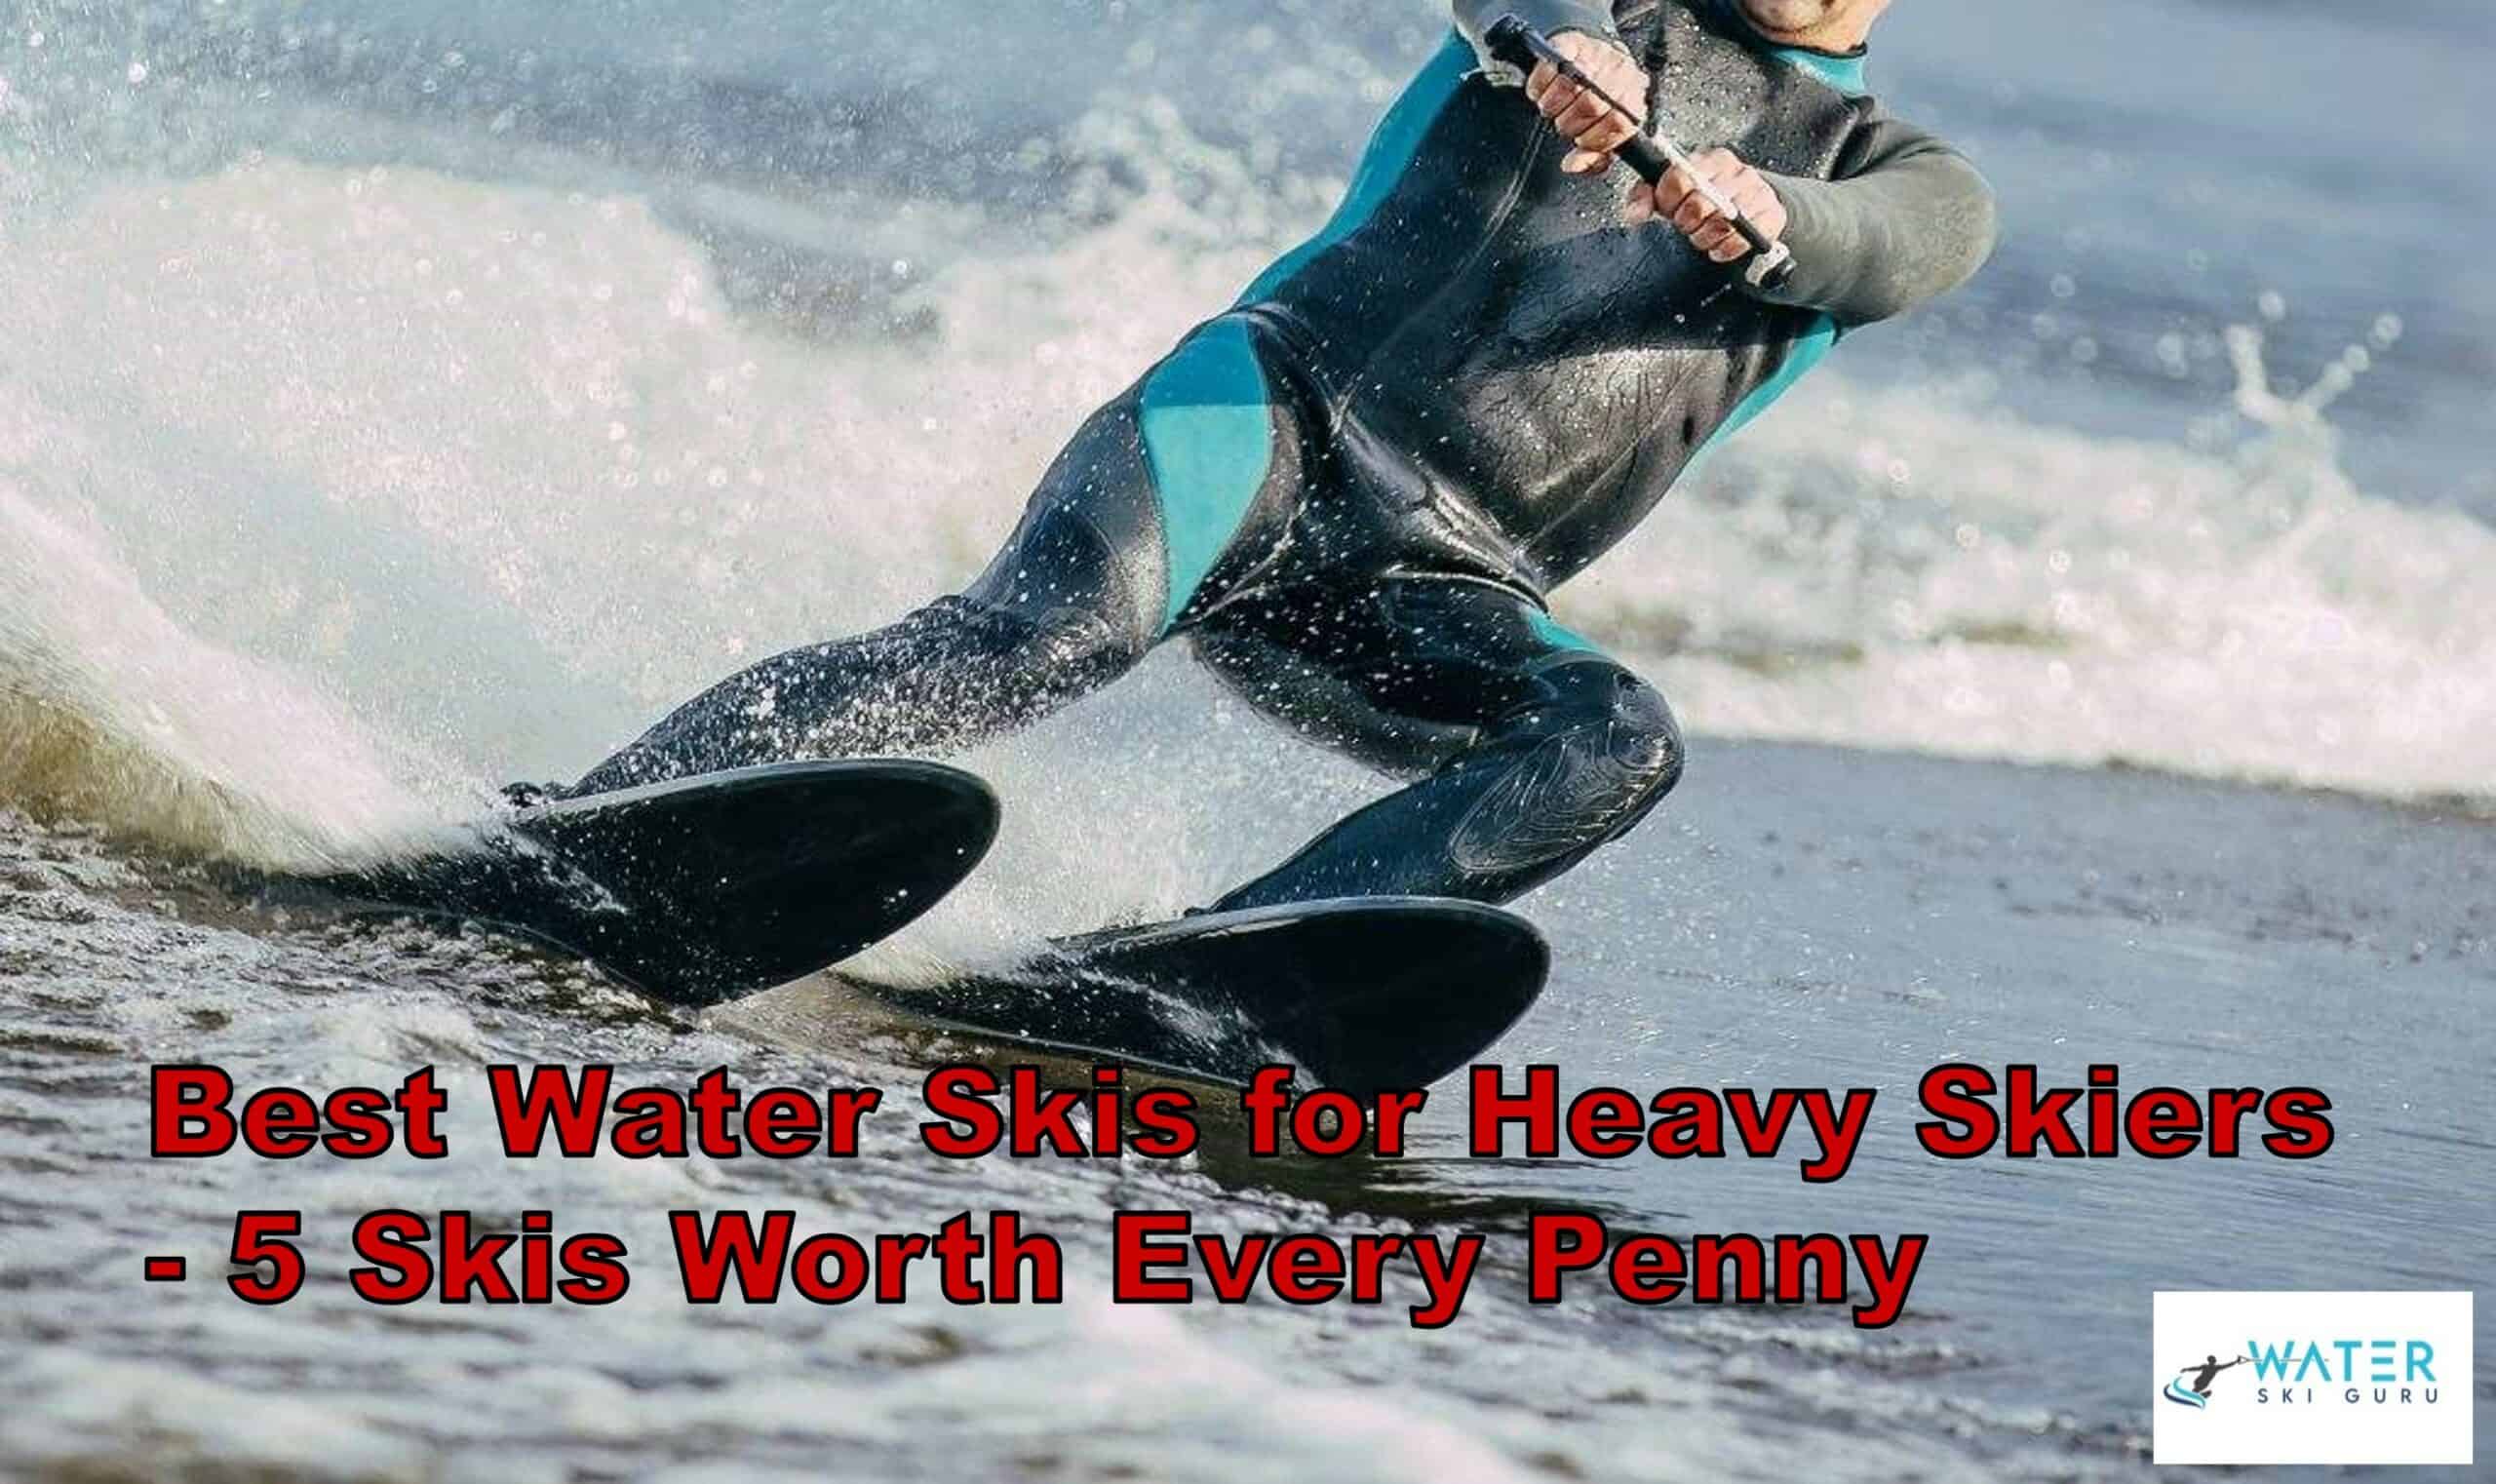 Best Water Skis for Heavy Skiers - 5 Skis Worth Every Penny